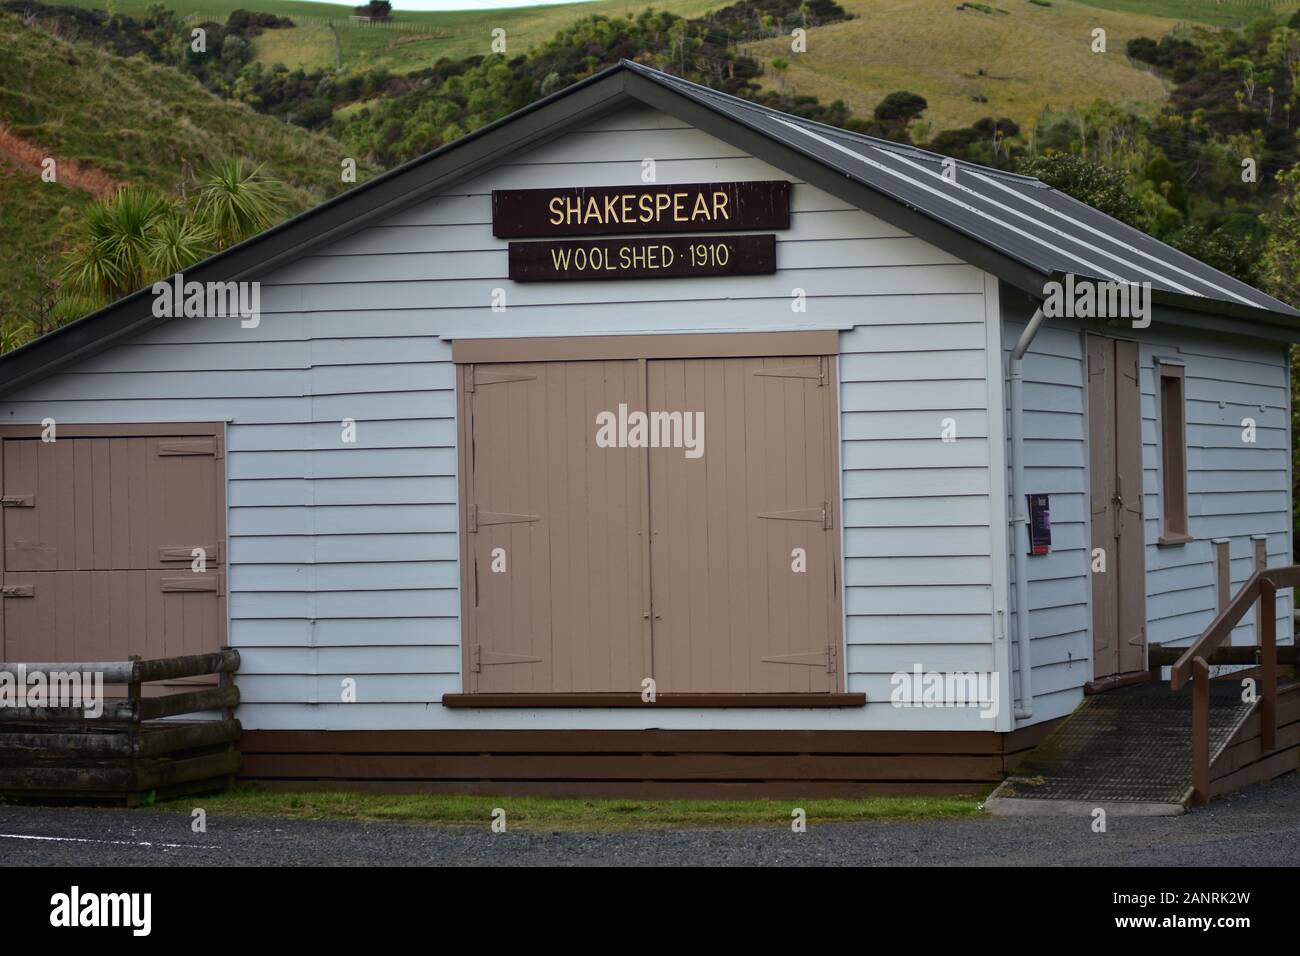 Preserved vintage wooden woolshed of Shakespear family on Whangaparaoa Peninsula from beginning of twentieth century. Stock Photo